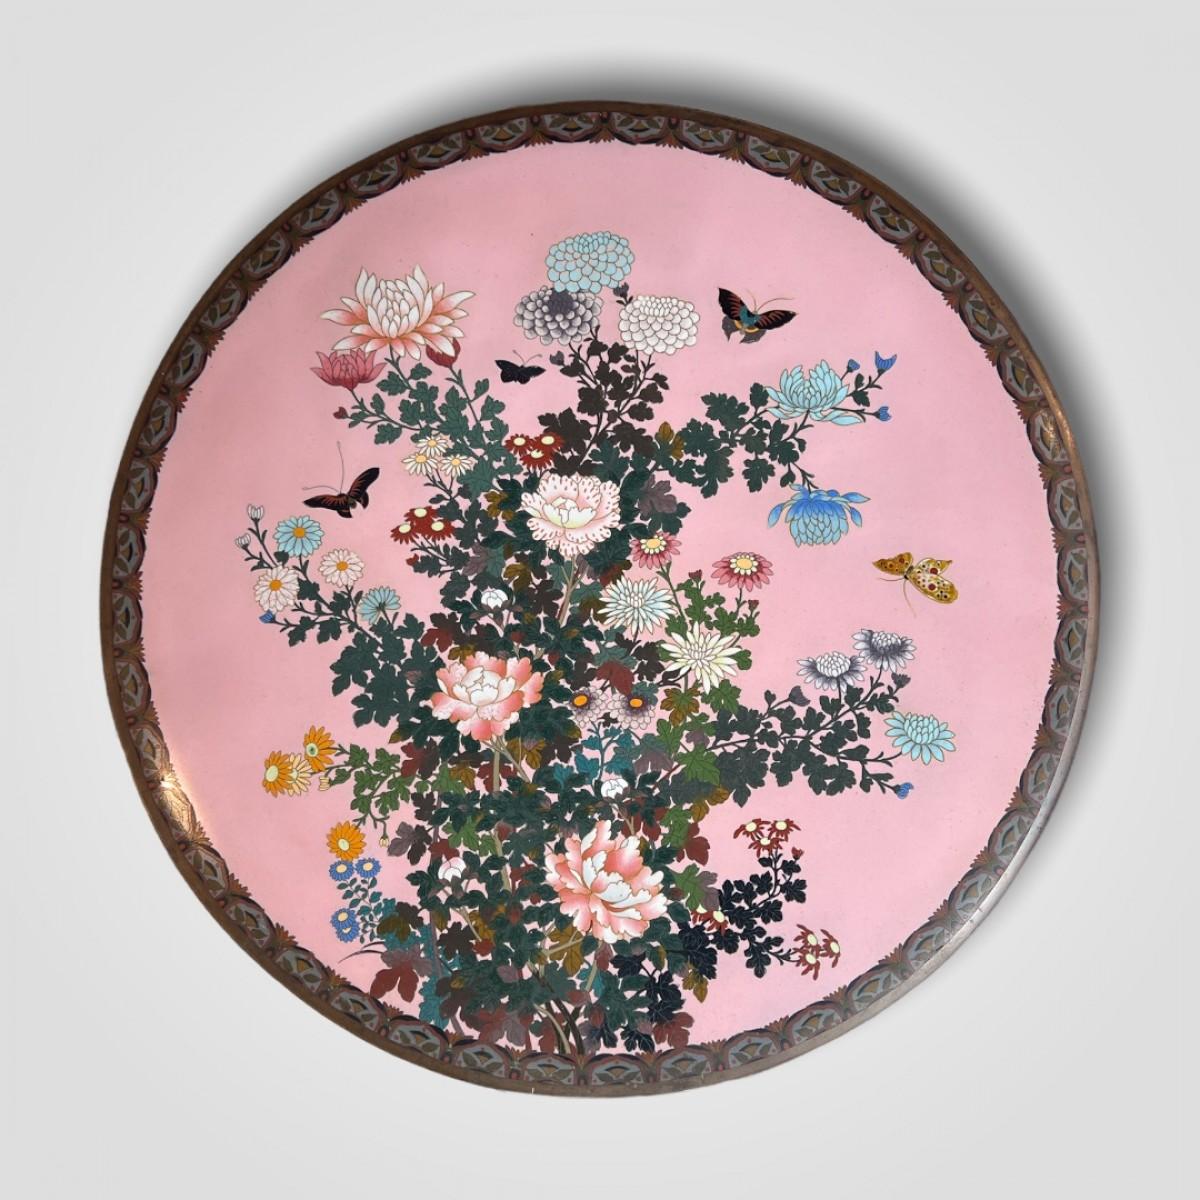 Extra Large cloisonné enamel charger with a decor of butterflies among flowers on a light pink ground which is a very uncommon color.

Japan, Meiji period, 19th Century.